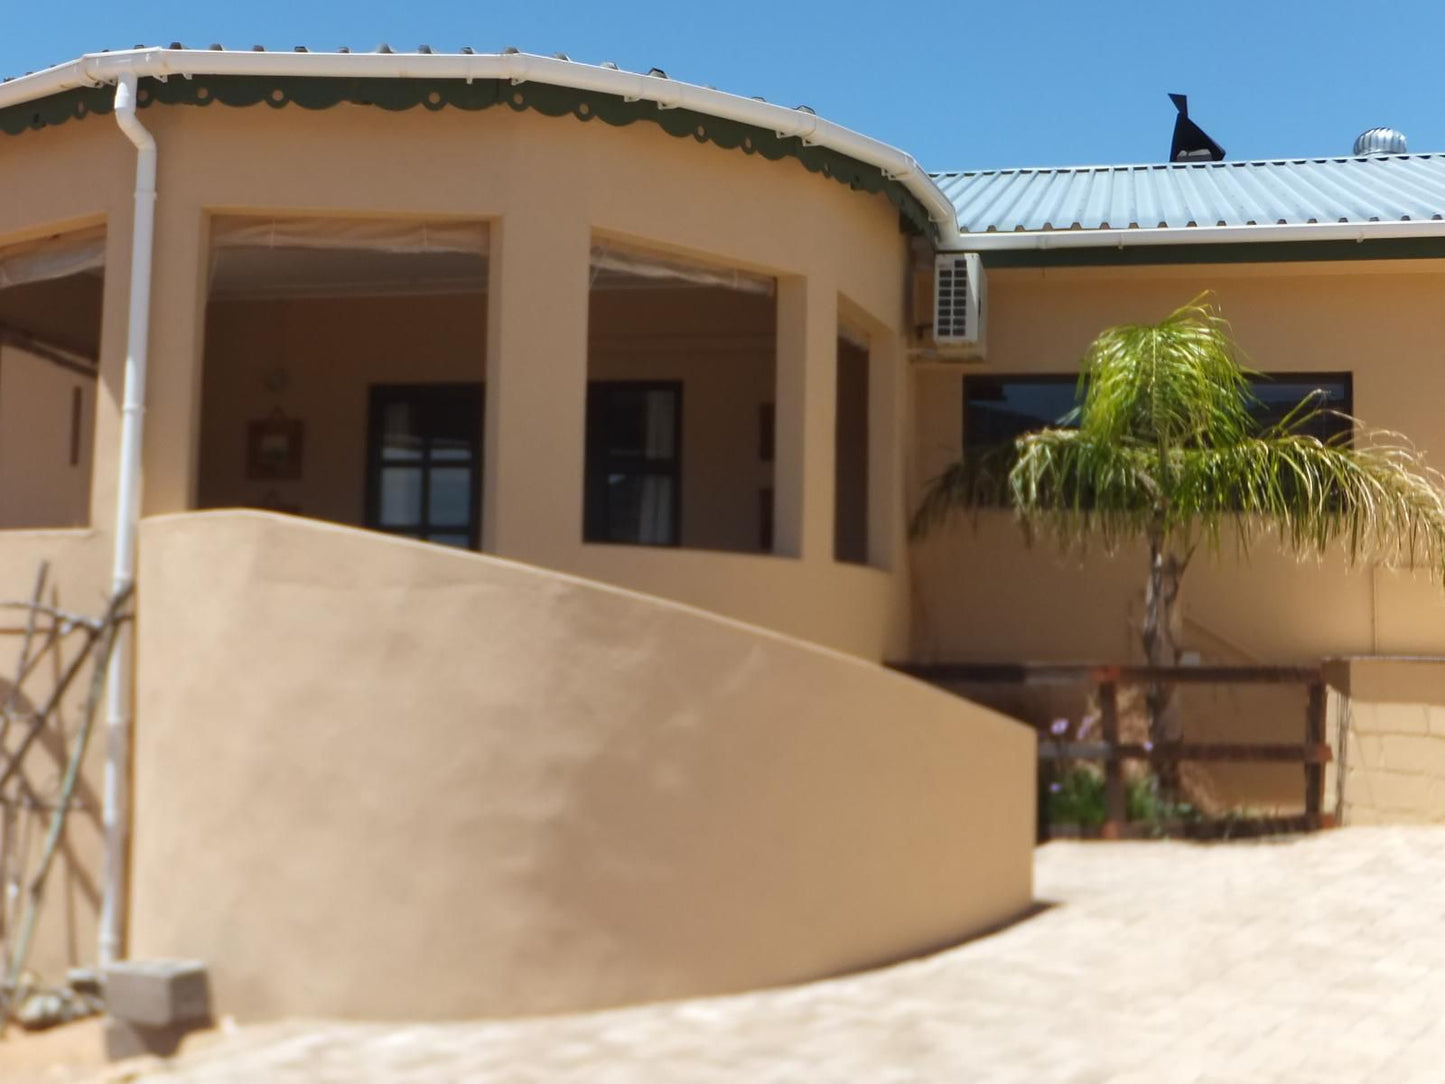 Daisy Country Lodge Springbok Northern Cape South Africa House, Building, Architecture, Palm Tree, Plant, Nature, Wood